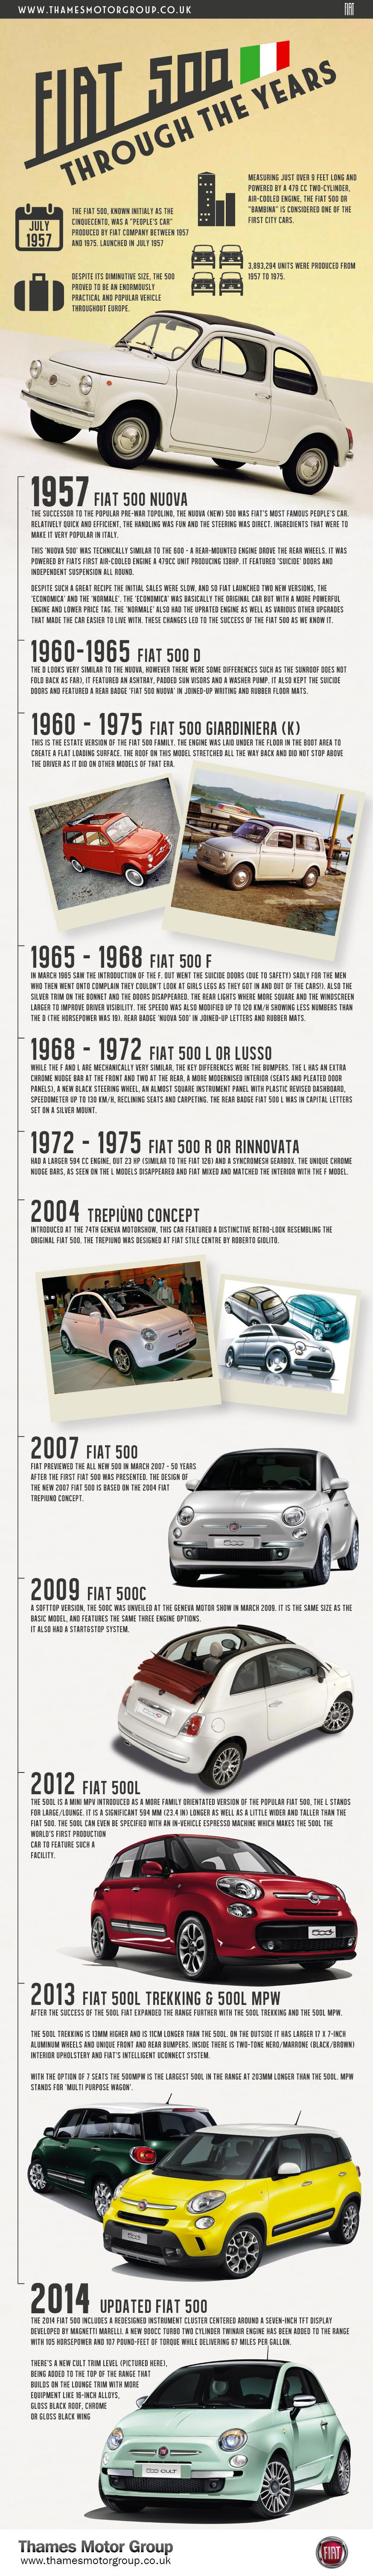 Infographic: The Fiat 500 Through the Years